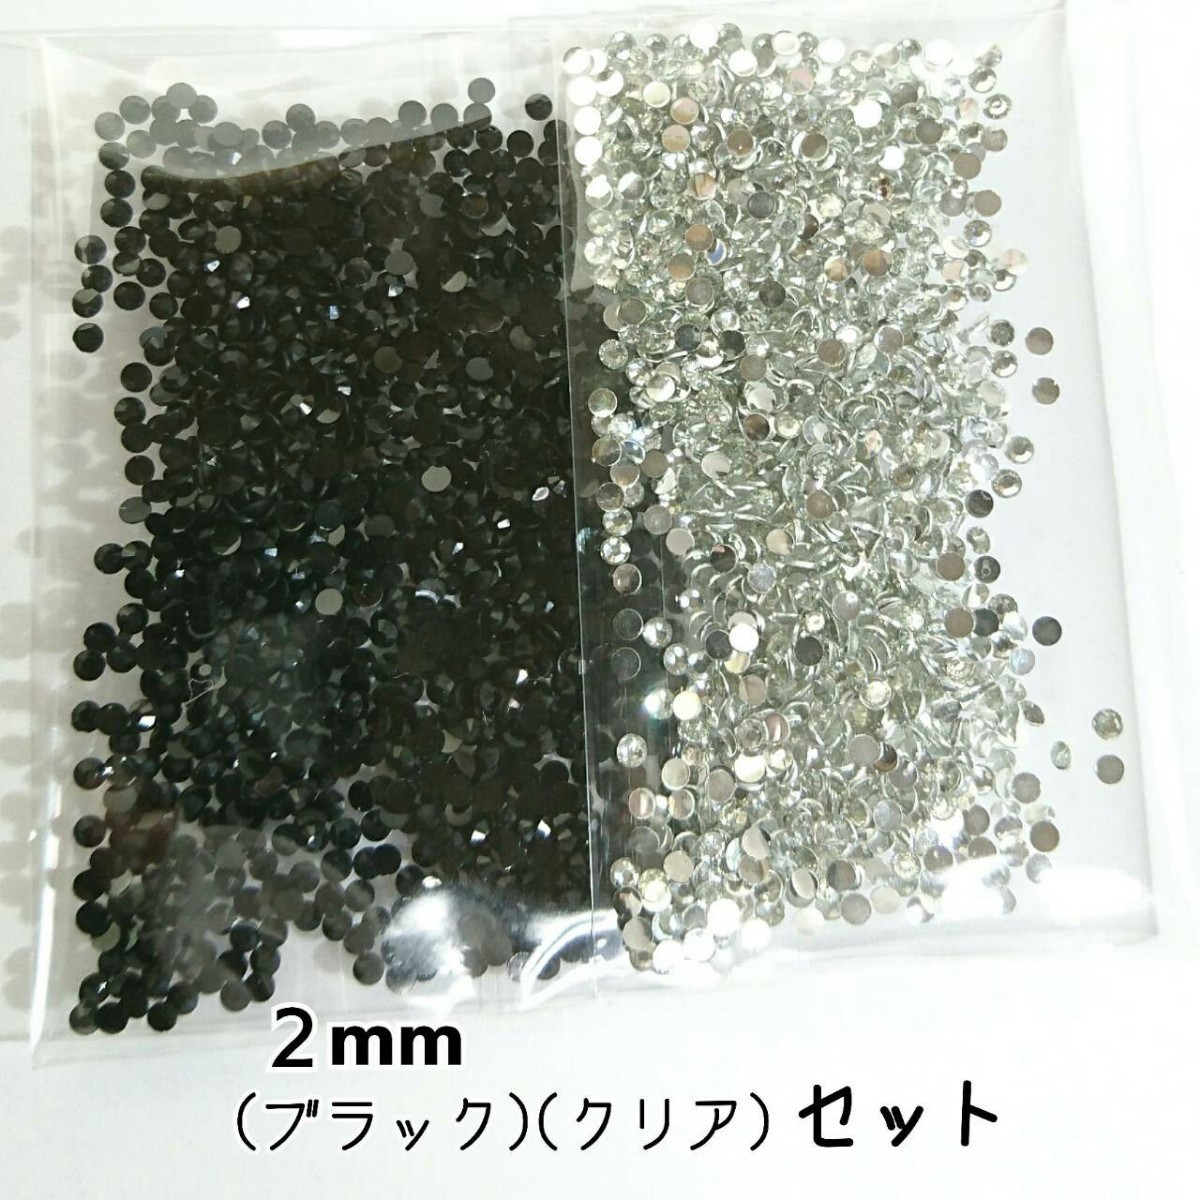  macromolecule Stone 2mm( black * clear ) deco parts nails * anonymity delivery 